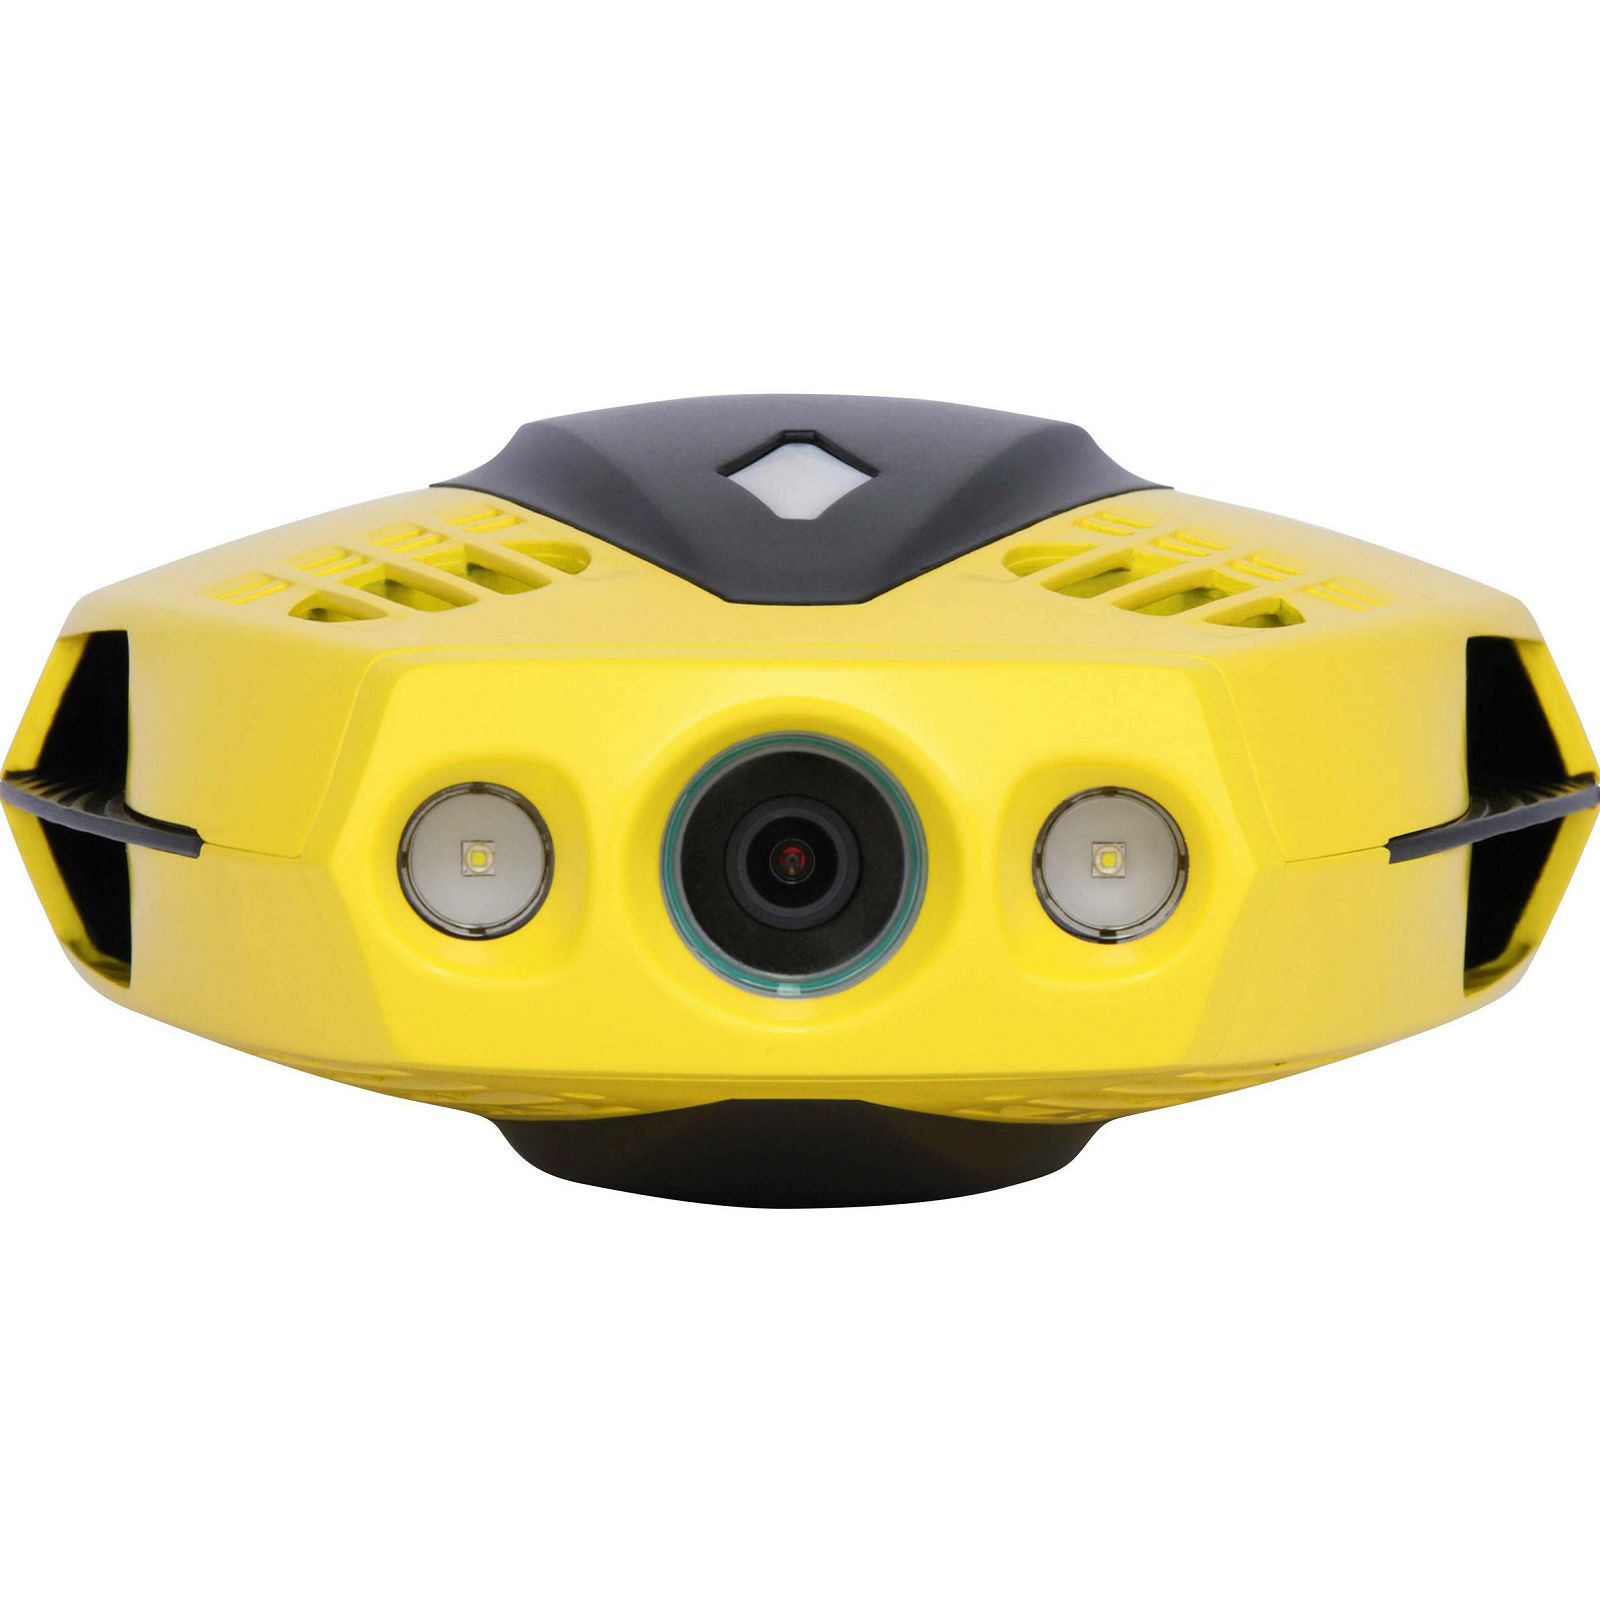 Chasing Innovation Dory Underwater drone